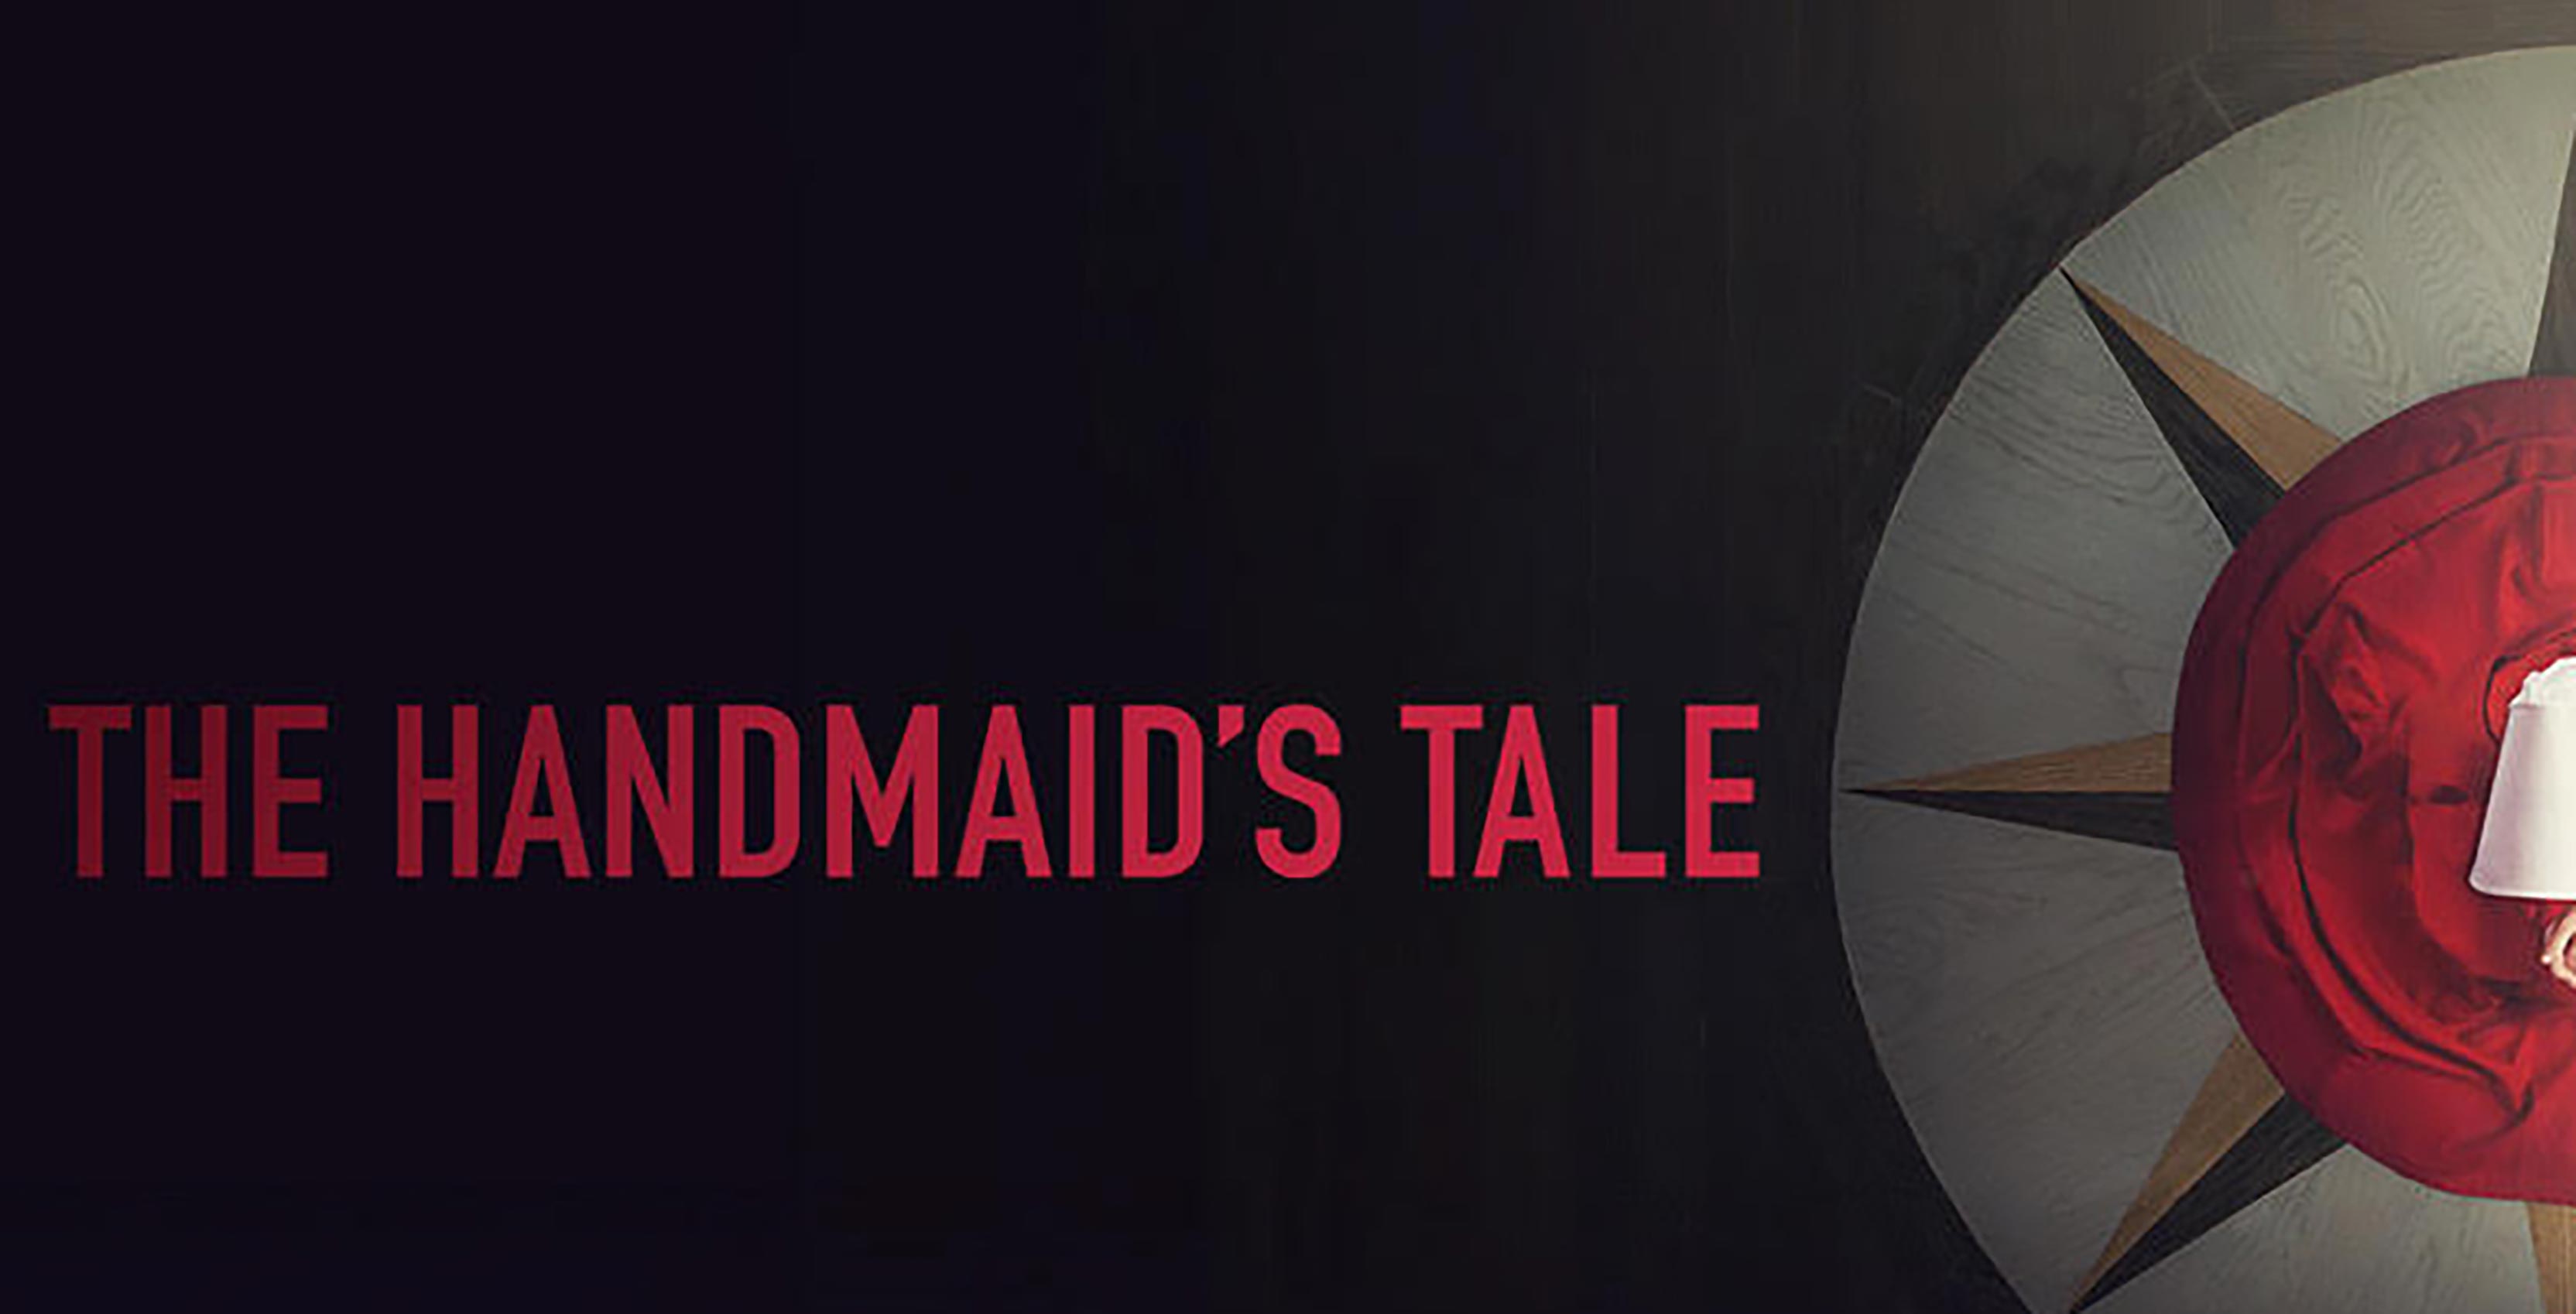 It's the green signal for 'The Handmaid' Tale' Season 4. When, How, What? All the details are here